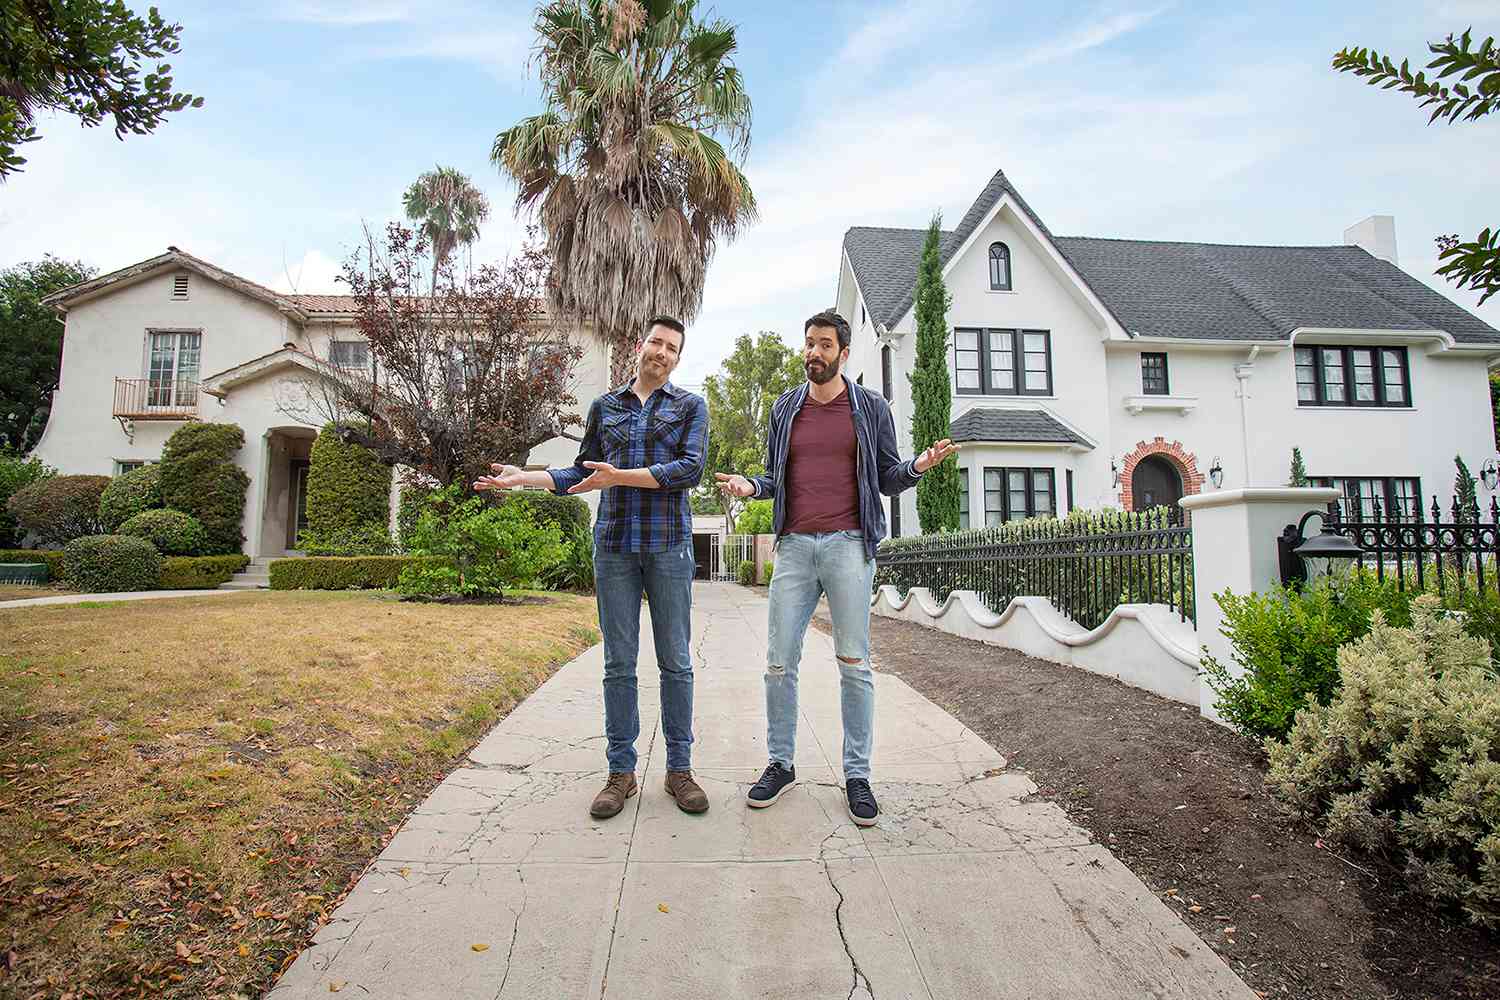 37++ Where are property brothers filming in 2020 ideas in 2021 